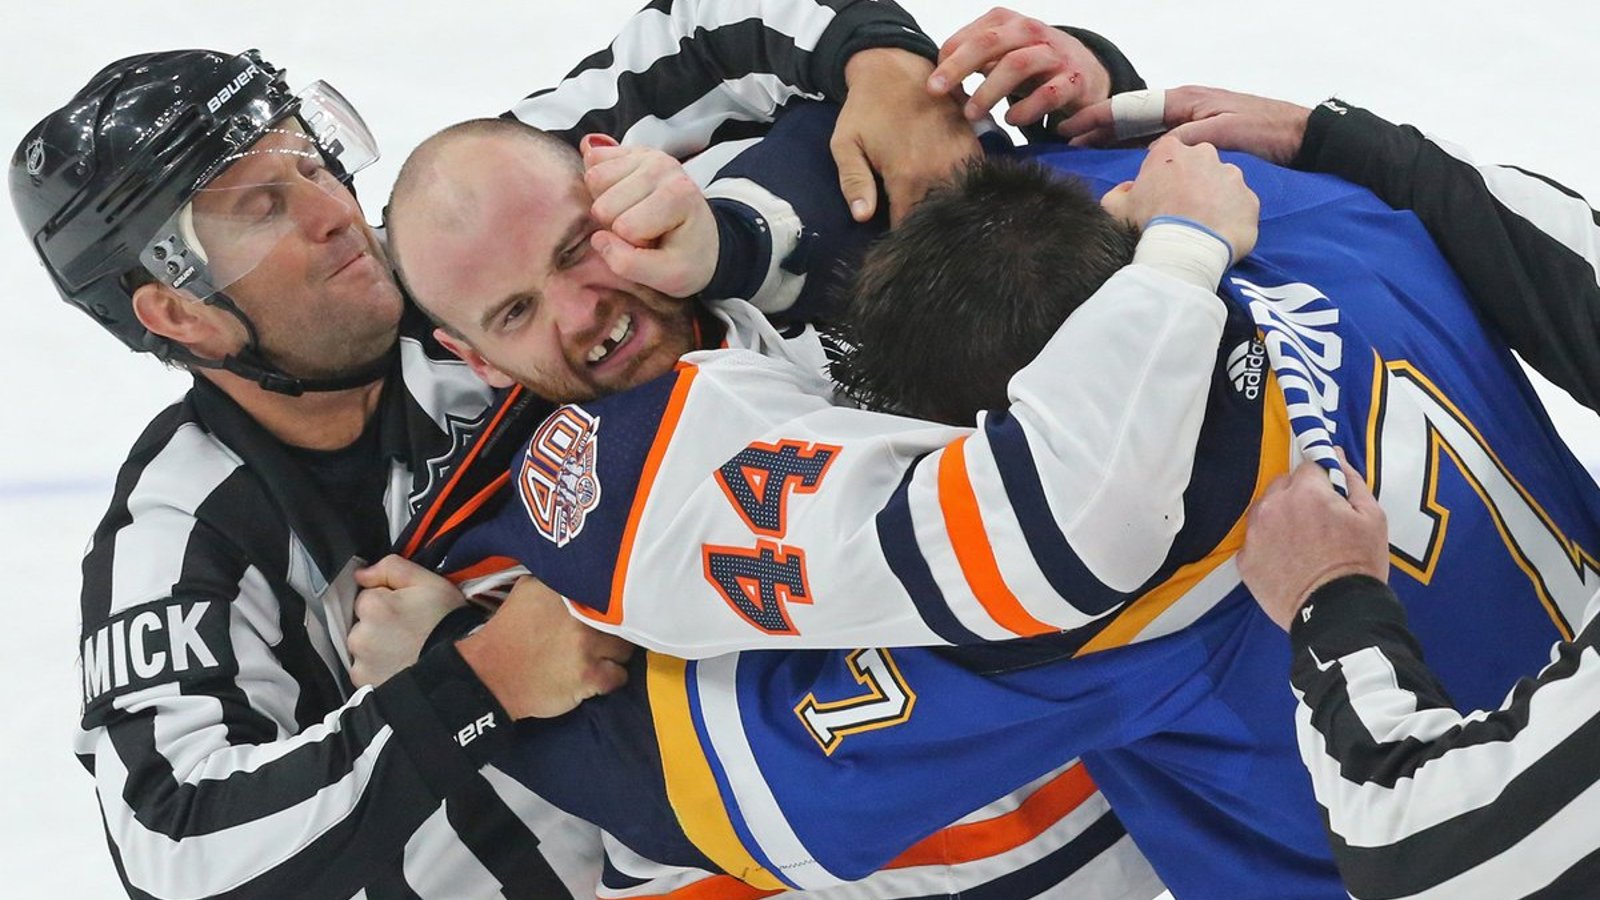 Former Oilers teammates get in spirited fight after spending the previous evening together! 